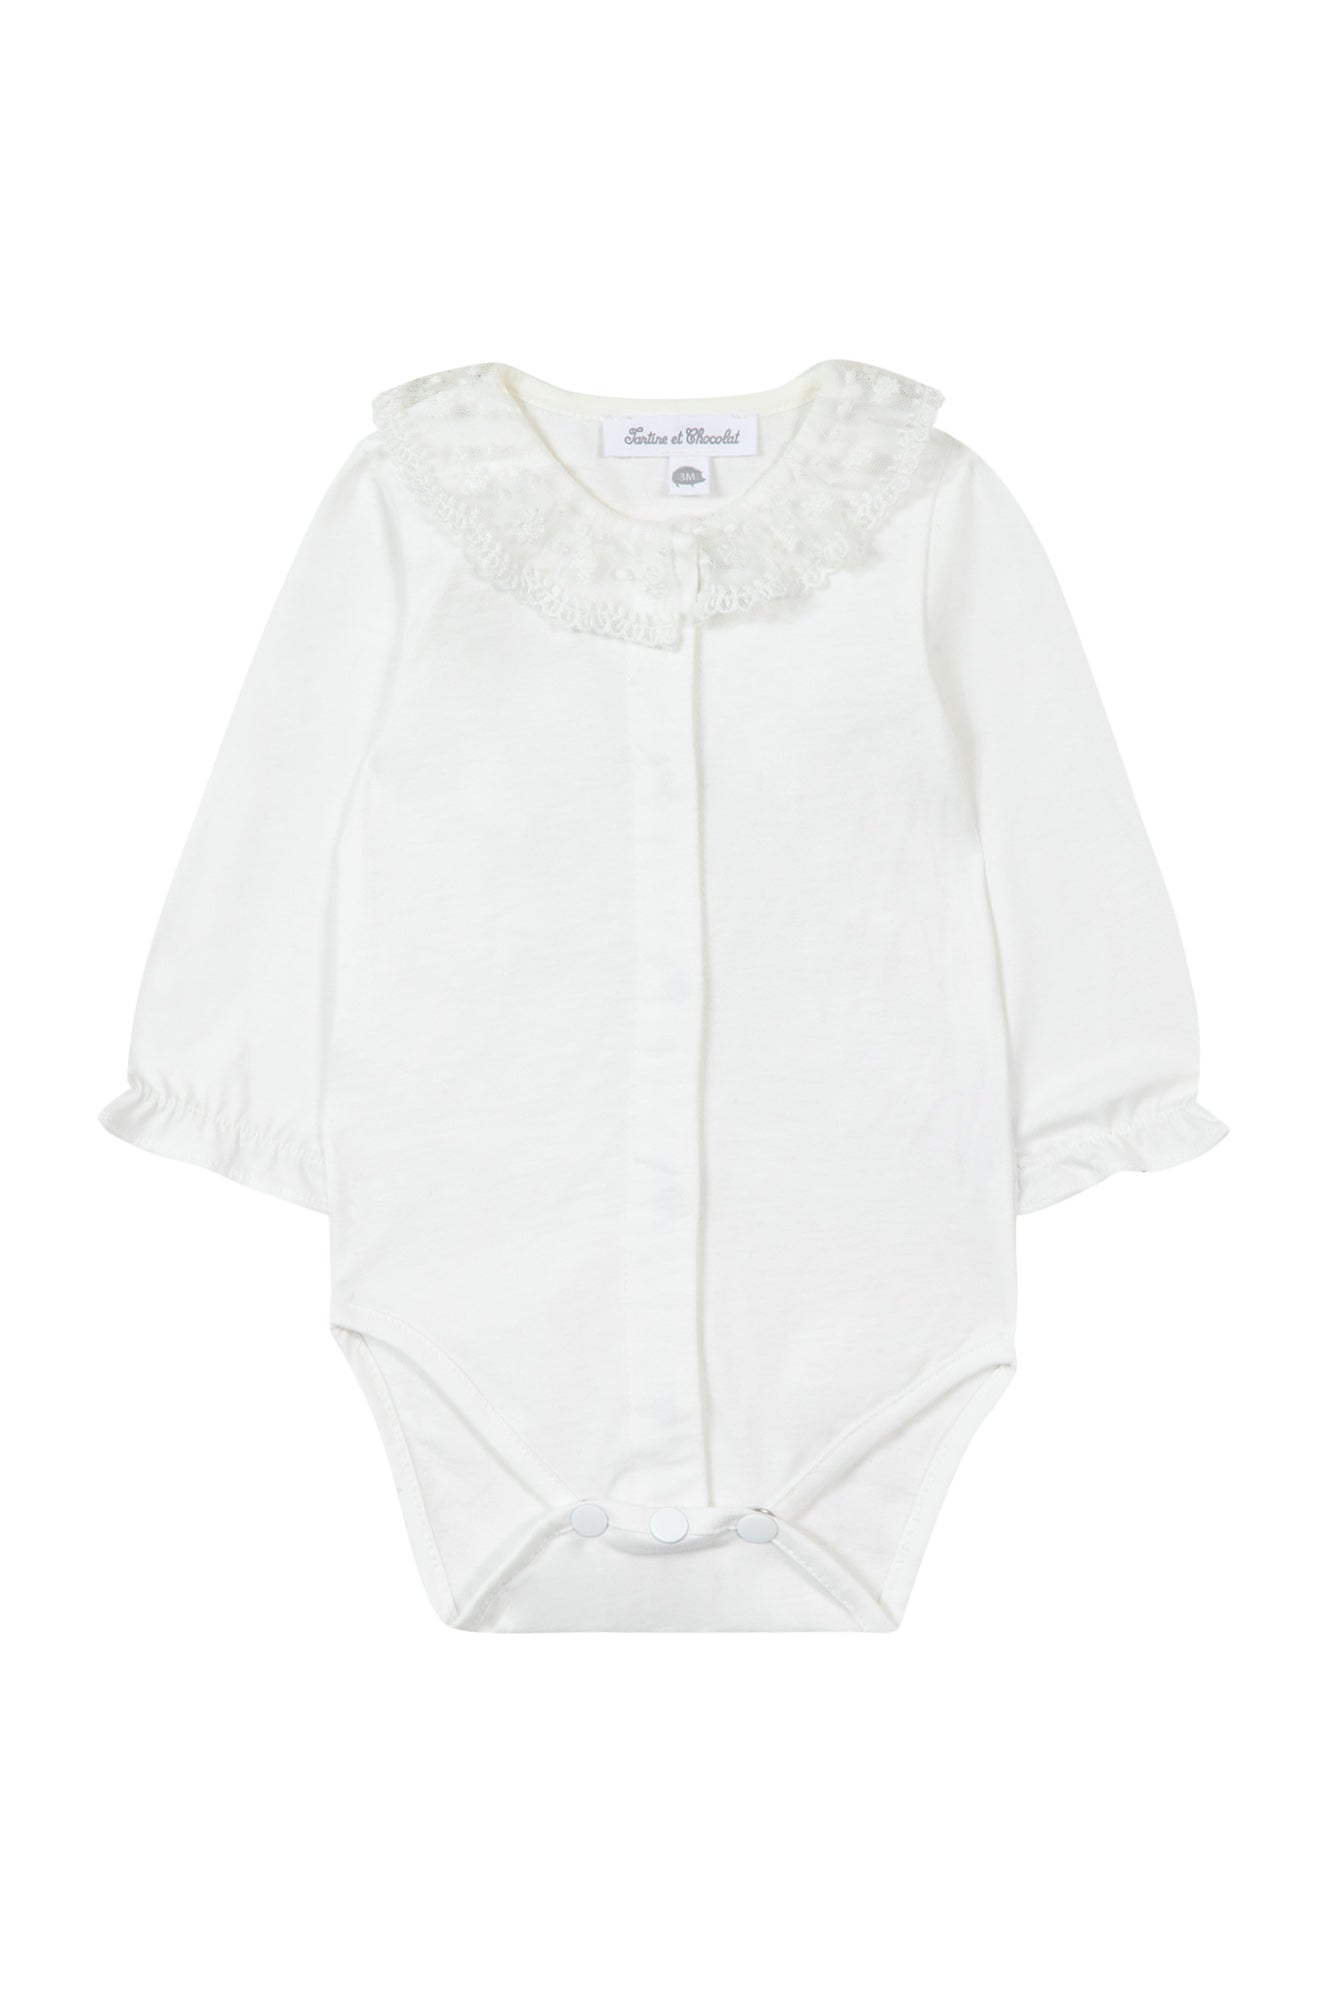 Bodysuit - Mother-of-pearl Tulle Embroidered Pearl / 3M